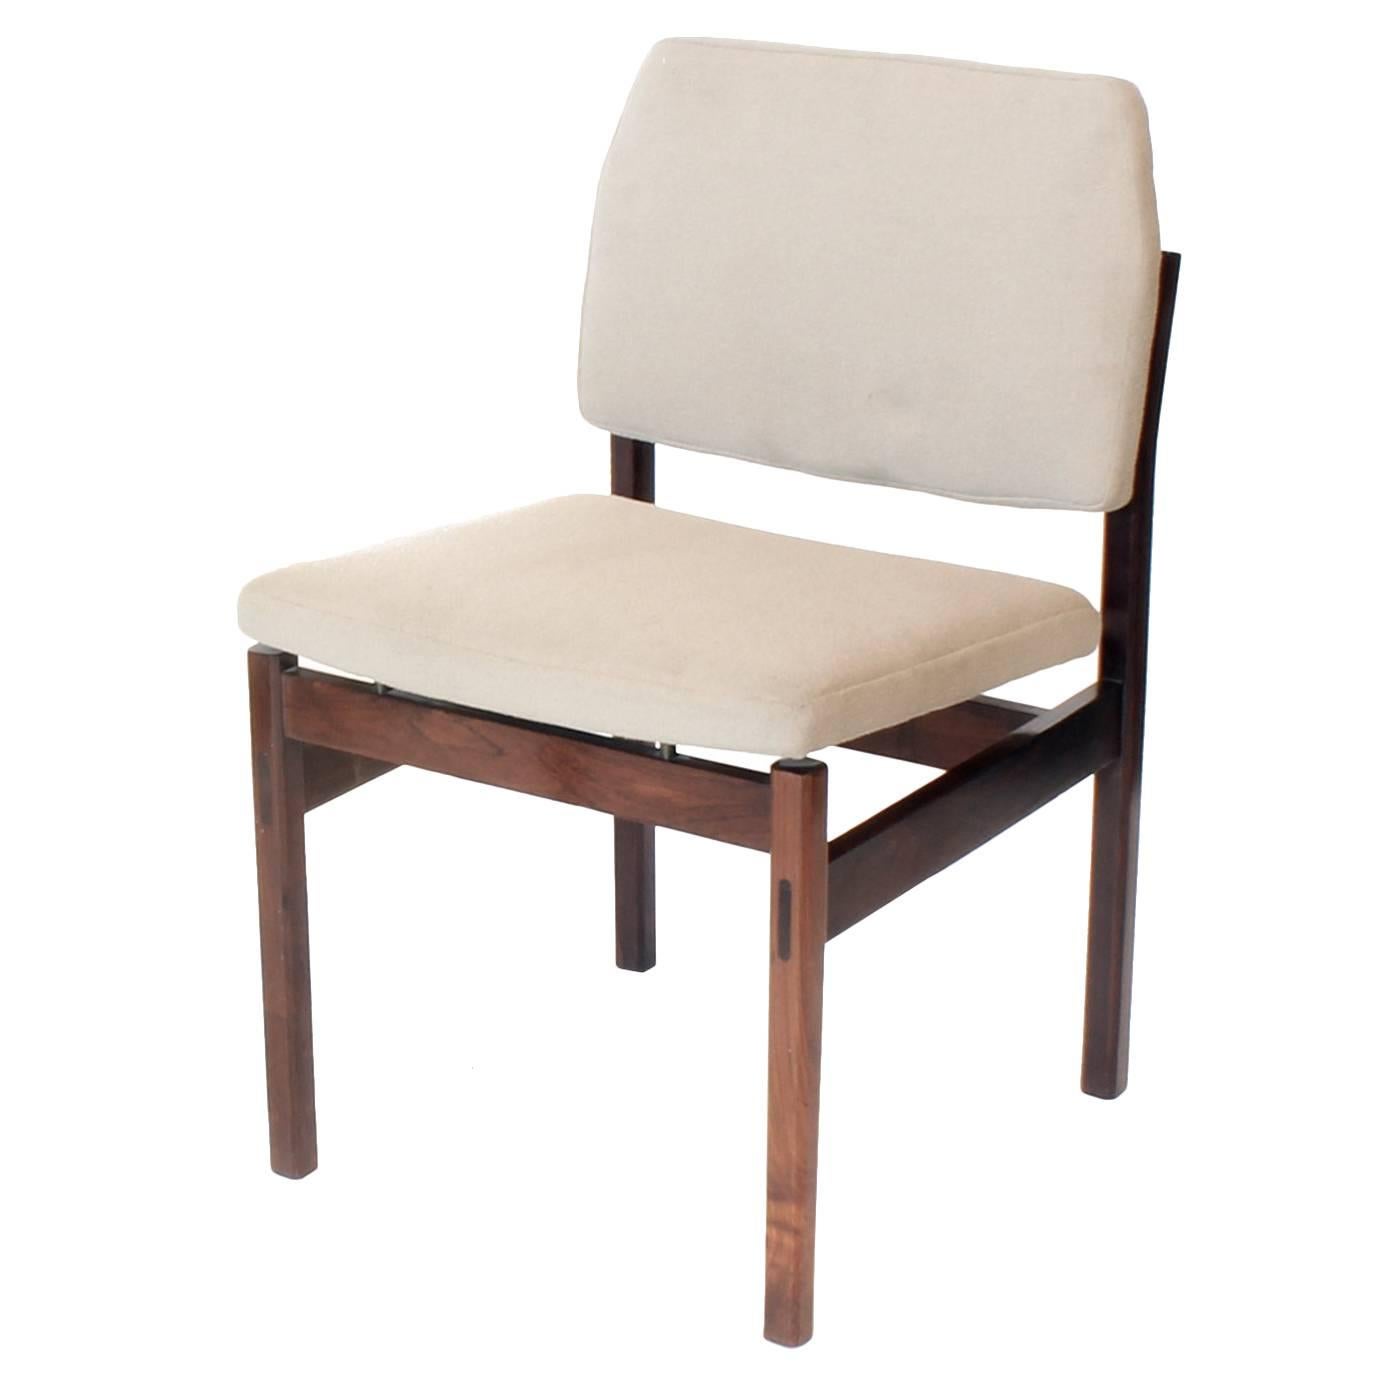 Arredamento Midcentury brazilian Chair in Rosewood with Linen Upholstery, 60s